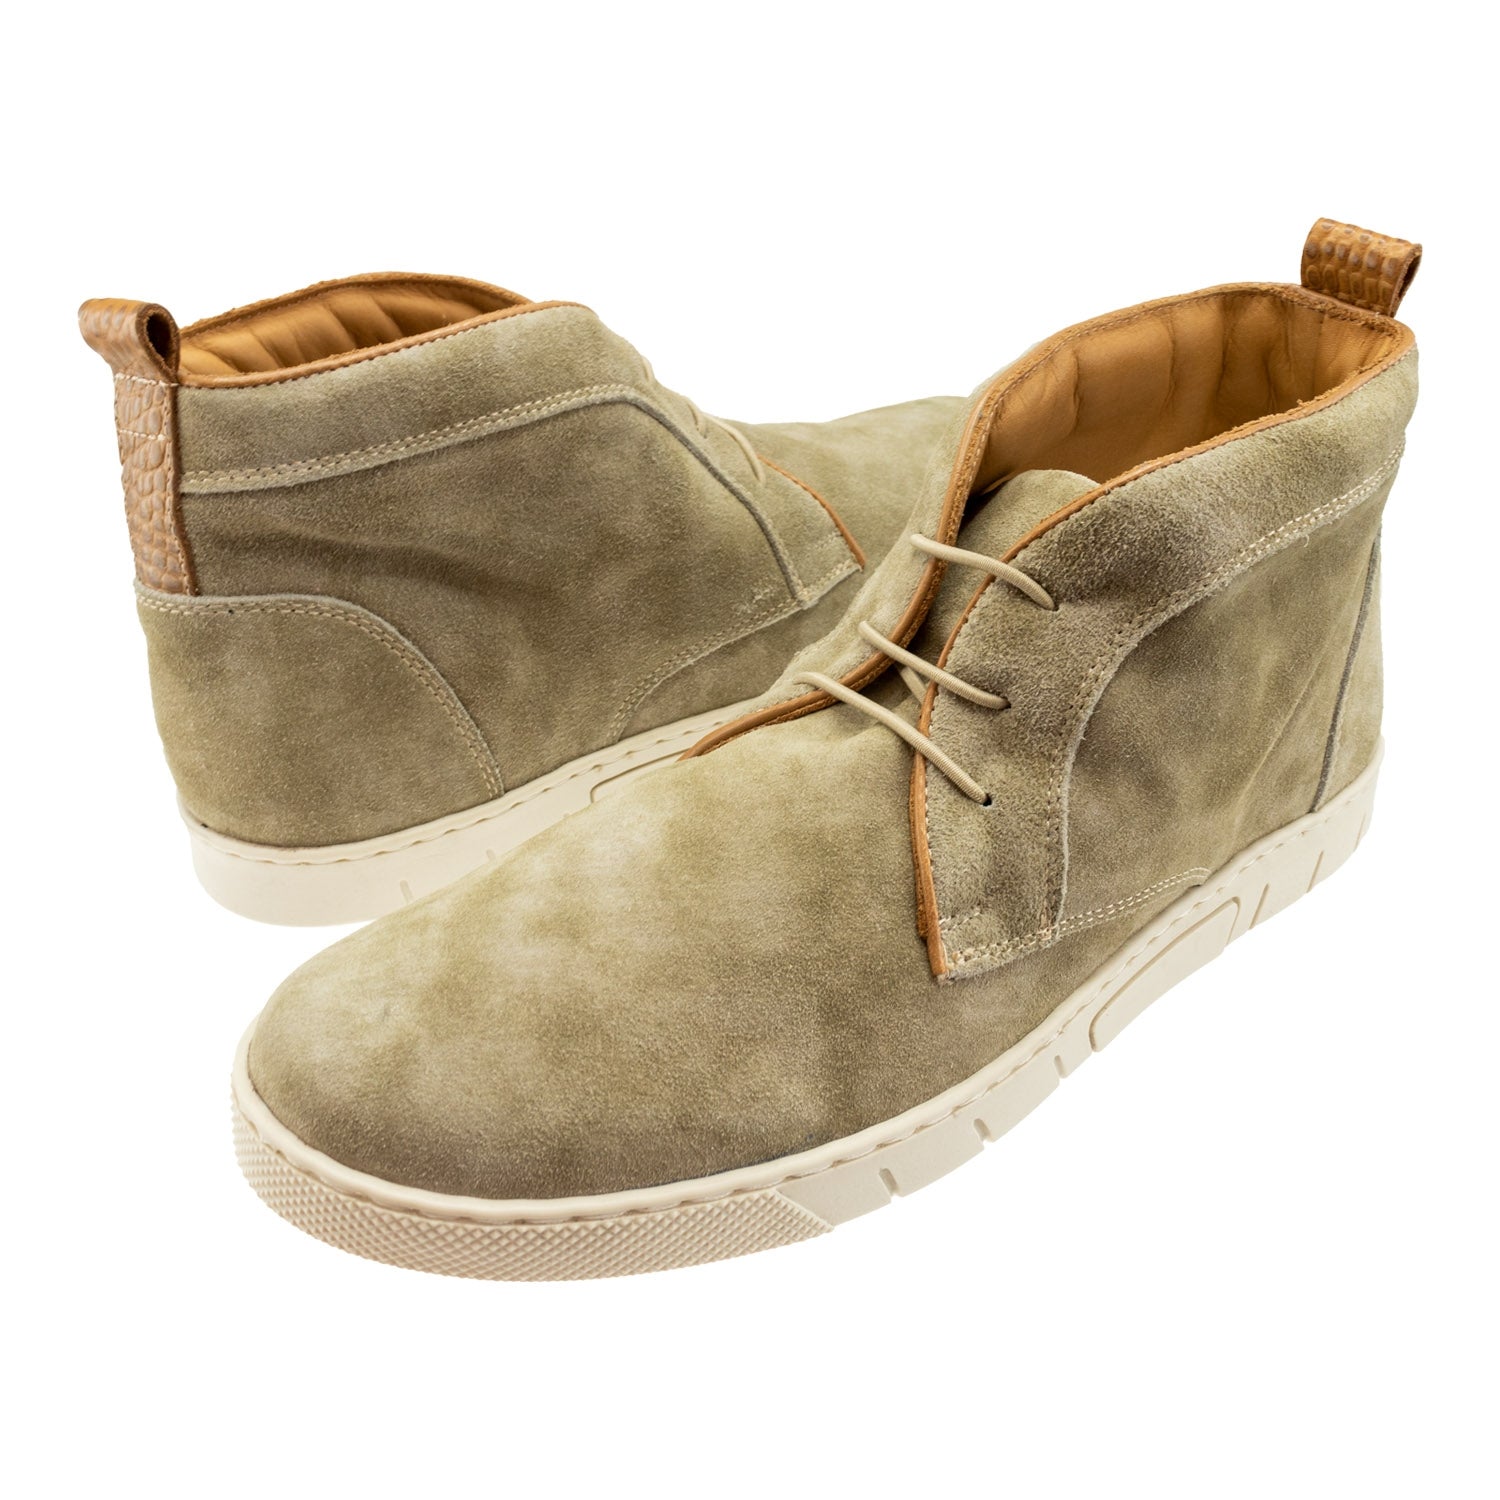 Scottsdale Suede Chukka Boot in Grey by T.B. Phelps